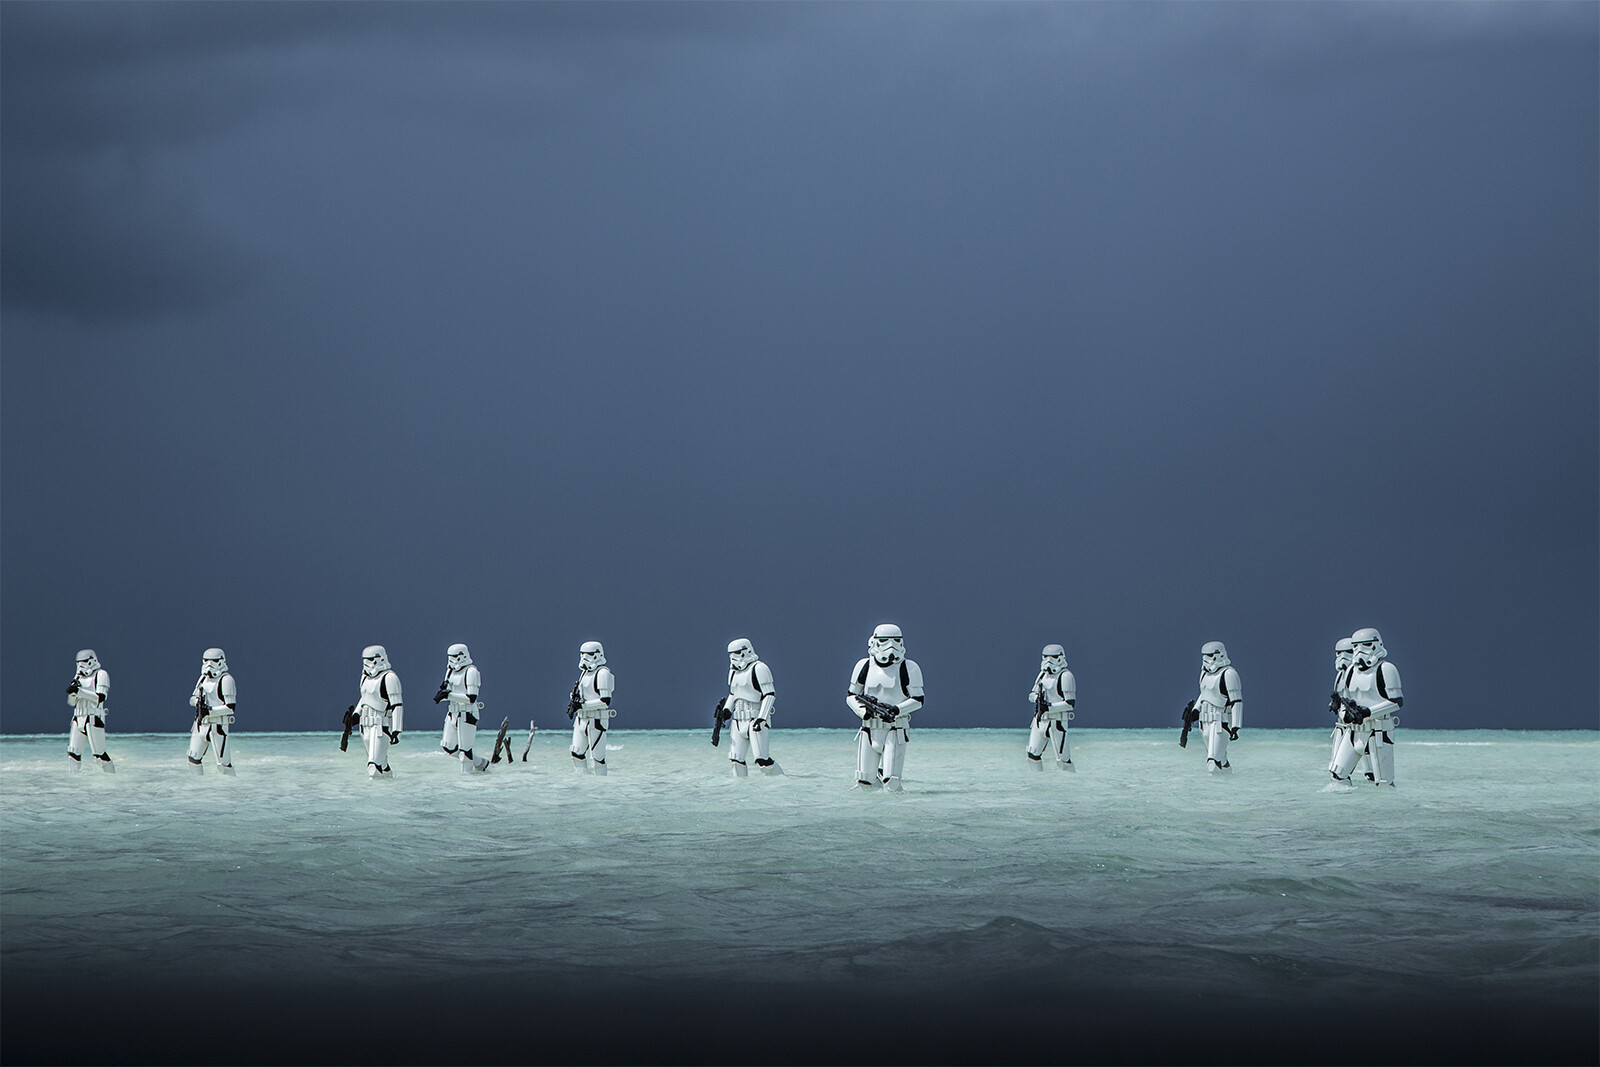 This is the Rogue One promotional image I based the above poster print on. 